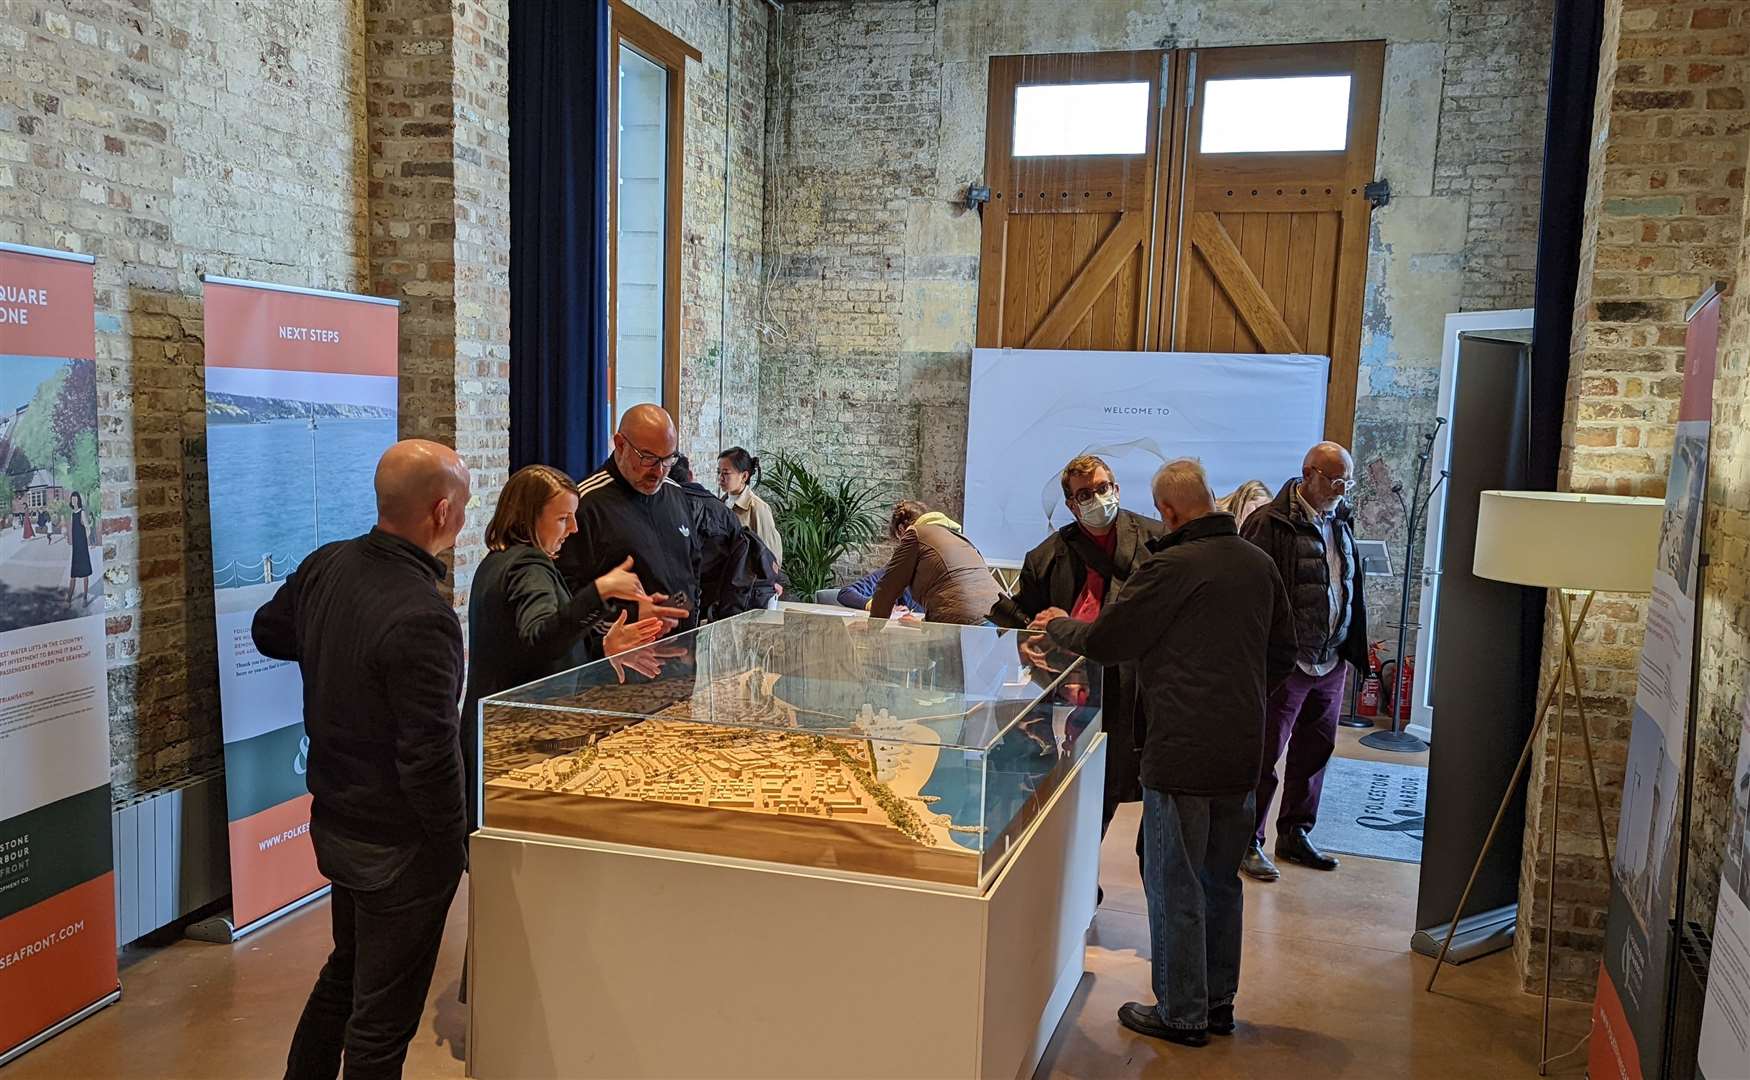 A public exhibition has been held as part of a consultation over the latest phase of the redevelopment of Folkestone seafront